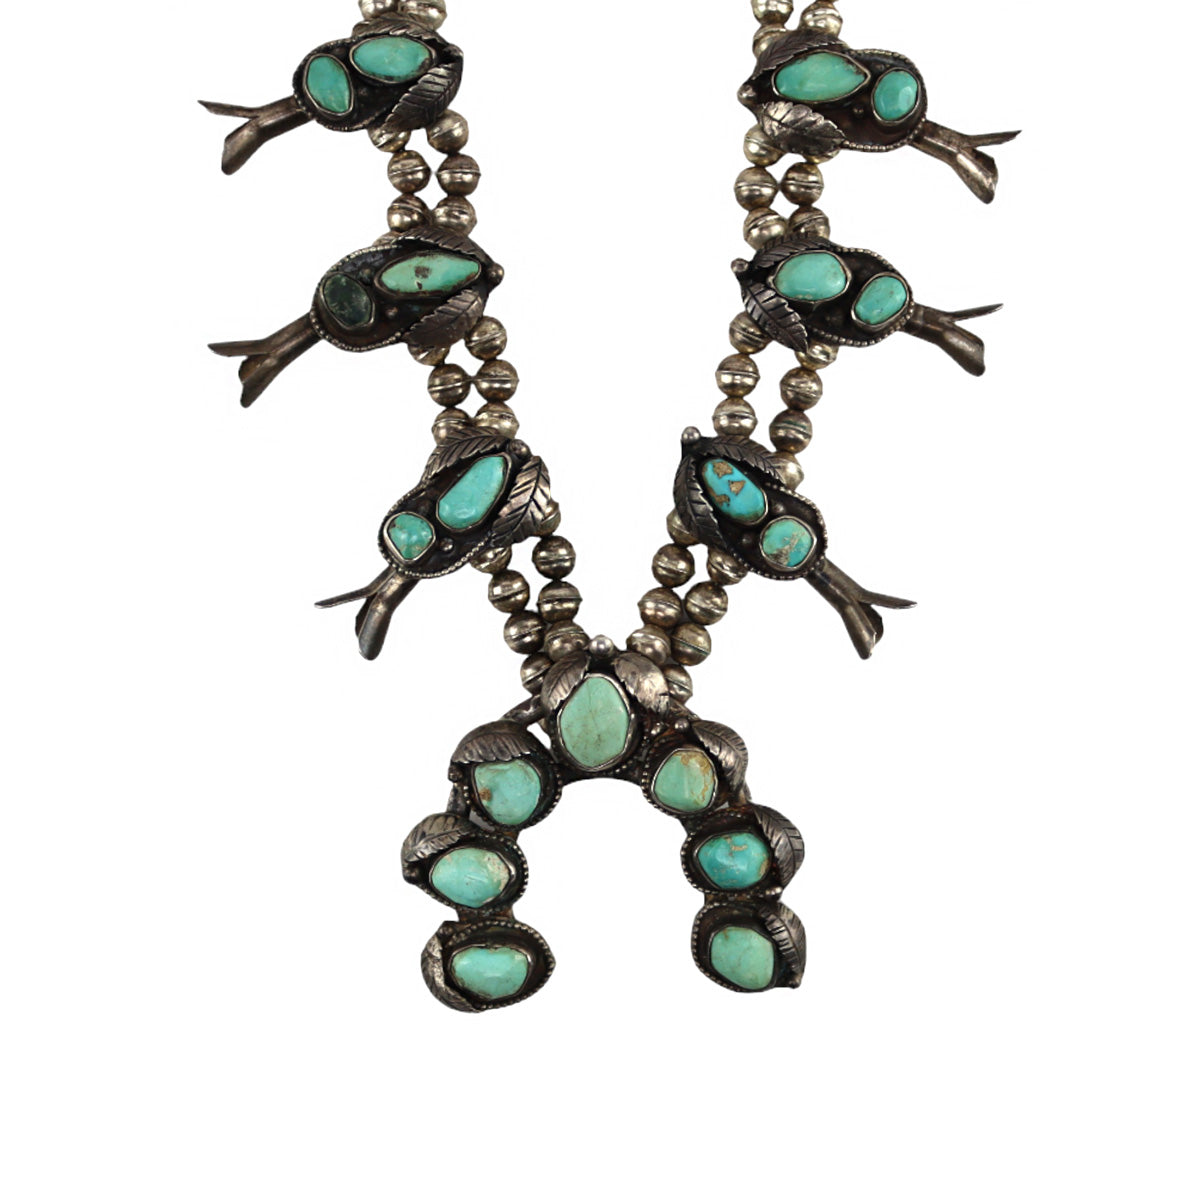 Navajo - Turquoise and Silver Squash Blossom Necklace with Feather Designs c. 1950-60s, 27" length (J16130-003)